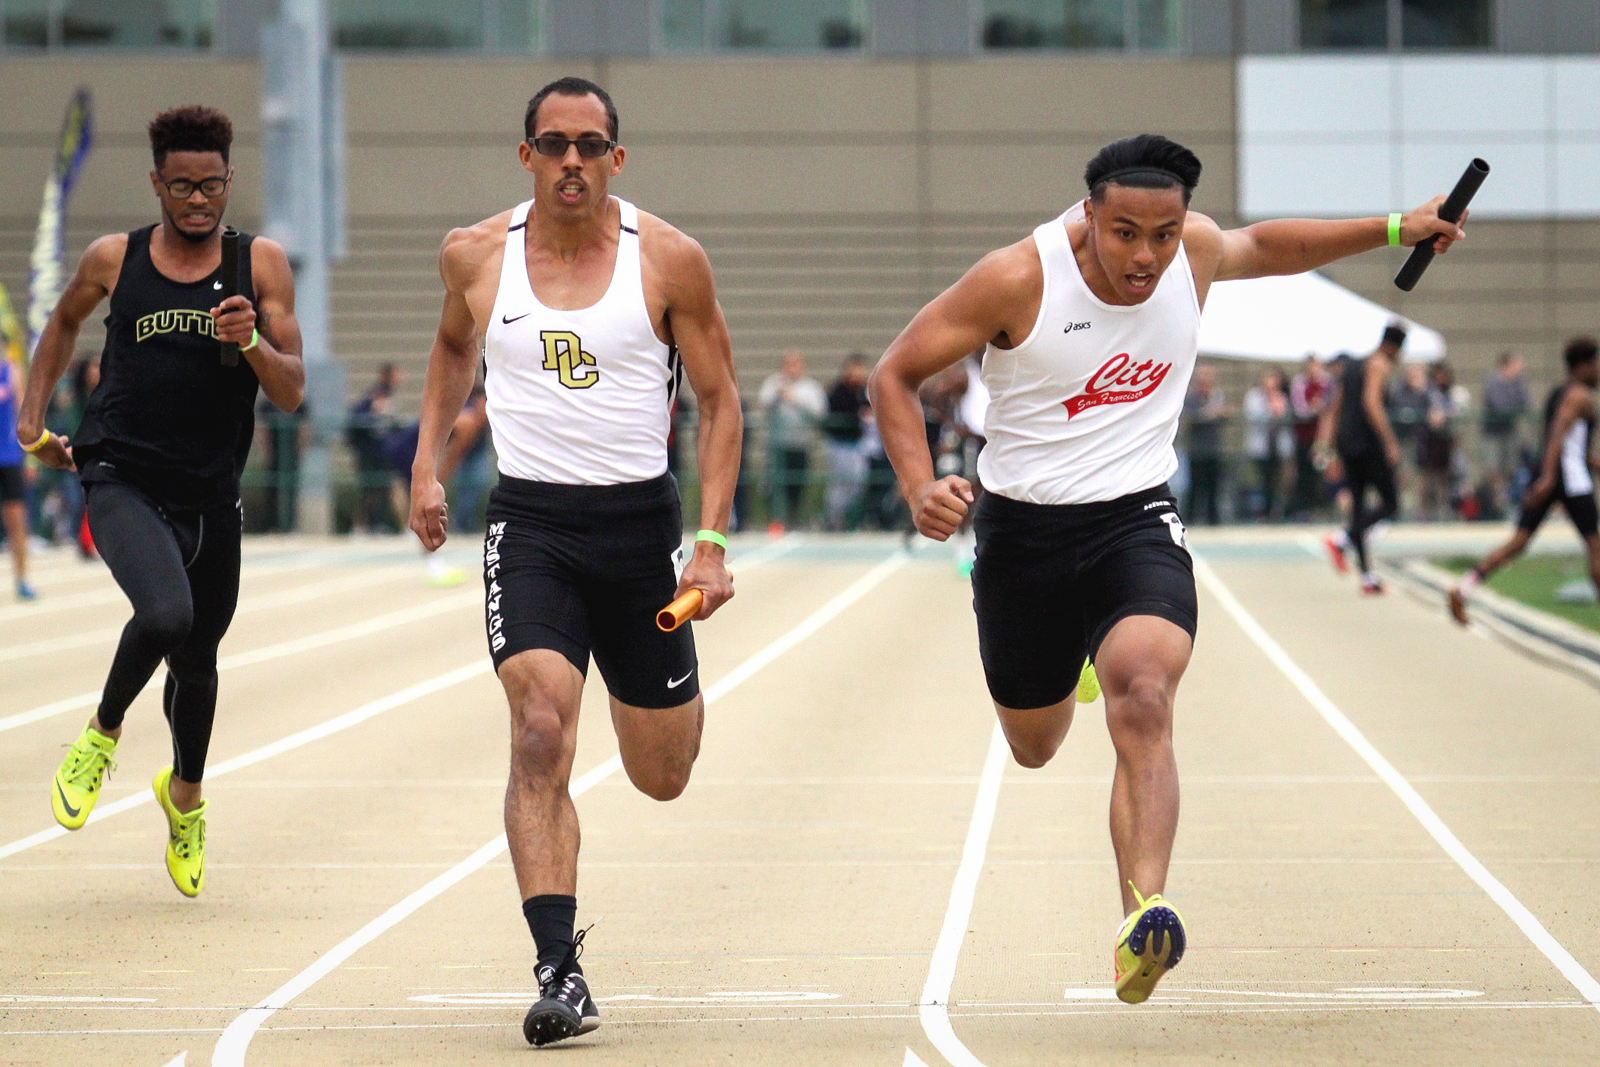 City College won both men's 4x100m and 4x400m relays at the Johnny Mathis Invitational held at SF State on February 24-25. (Photo by Craig Mandall)